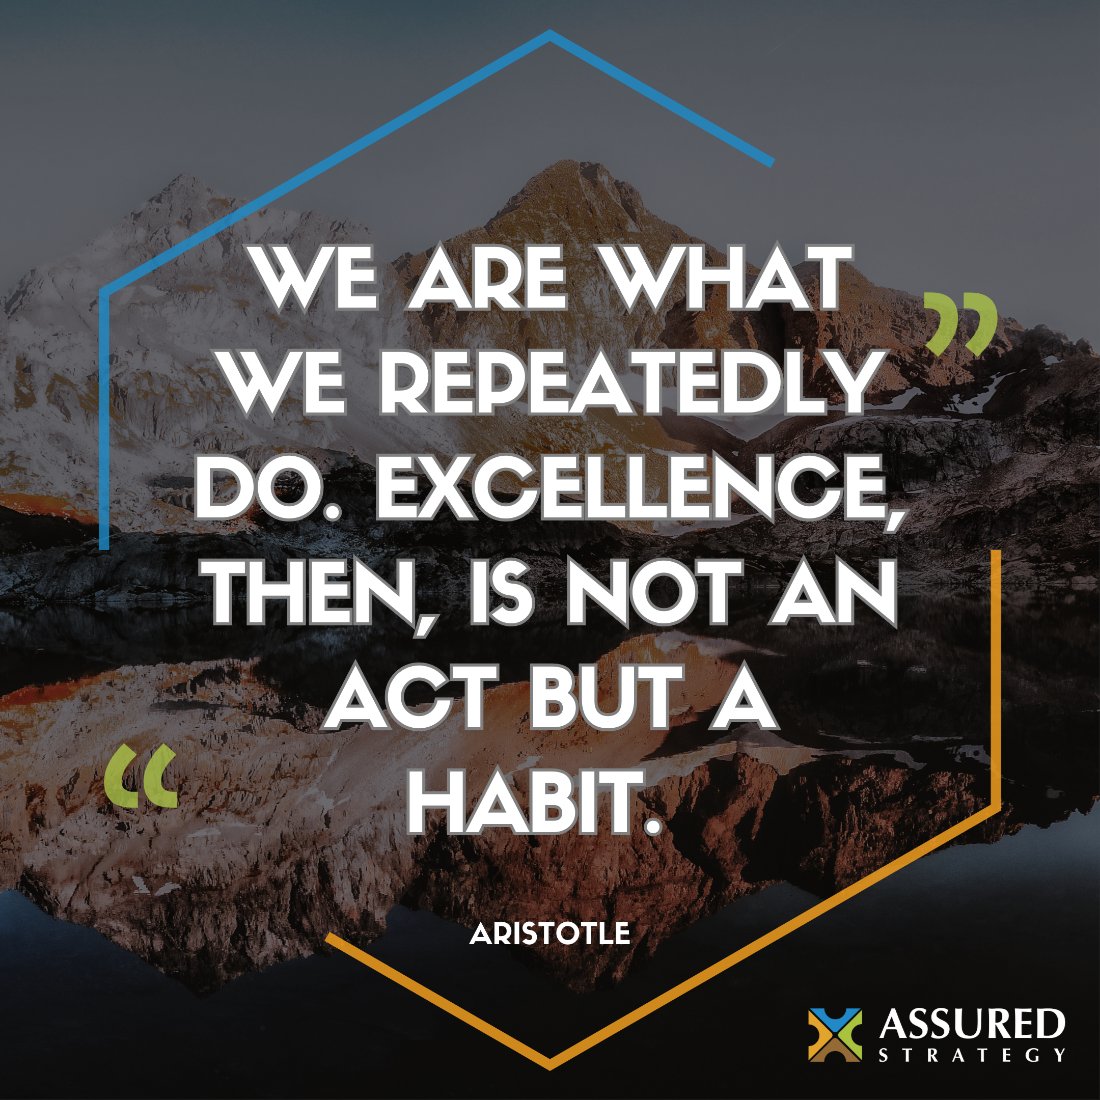 Success and excellence are built upon our habits. #MotivationalMonday 

#AssuredStrategy #StrategySherpa #ExecutiveCoaching #PerformanceCoaching #Strategy #Leadership #ExecutiveLeadership #GrowthStrategy #MidSizedBusiness #LargeBusiness #ScalingUp #Metronomics